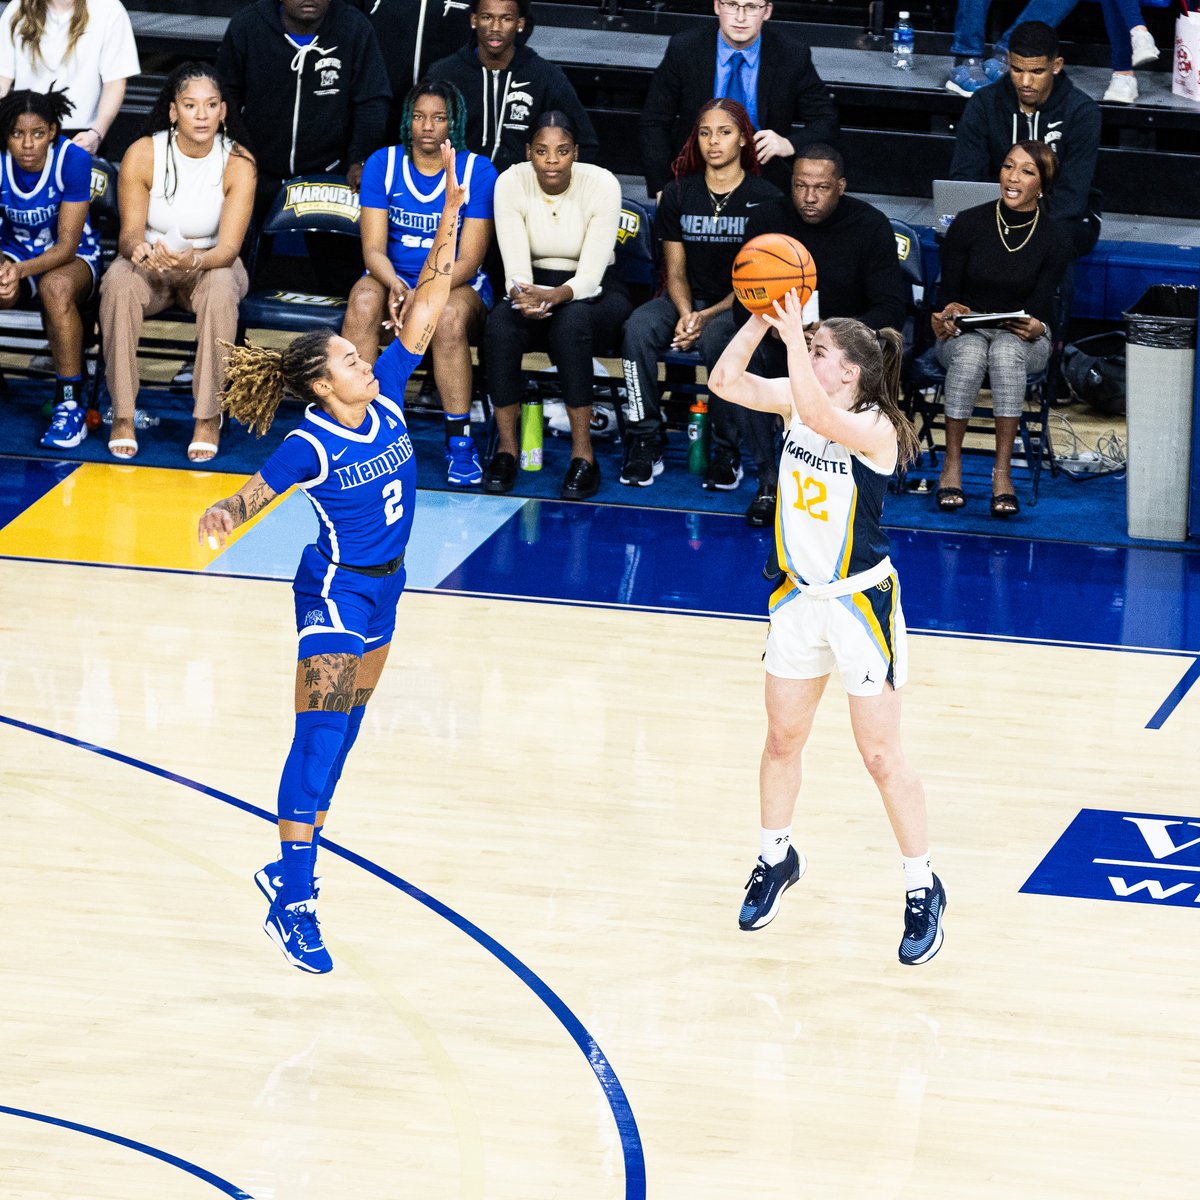 Sophomore+guard+Kenzie+Hare+scored+17+points+in+Marquettes+88-59+win+over+Memphis.+%28Photo+courtesy+of+Marquette+Athletics.%29